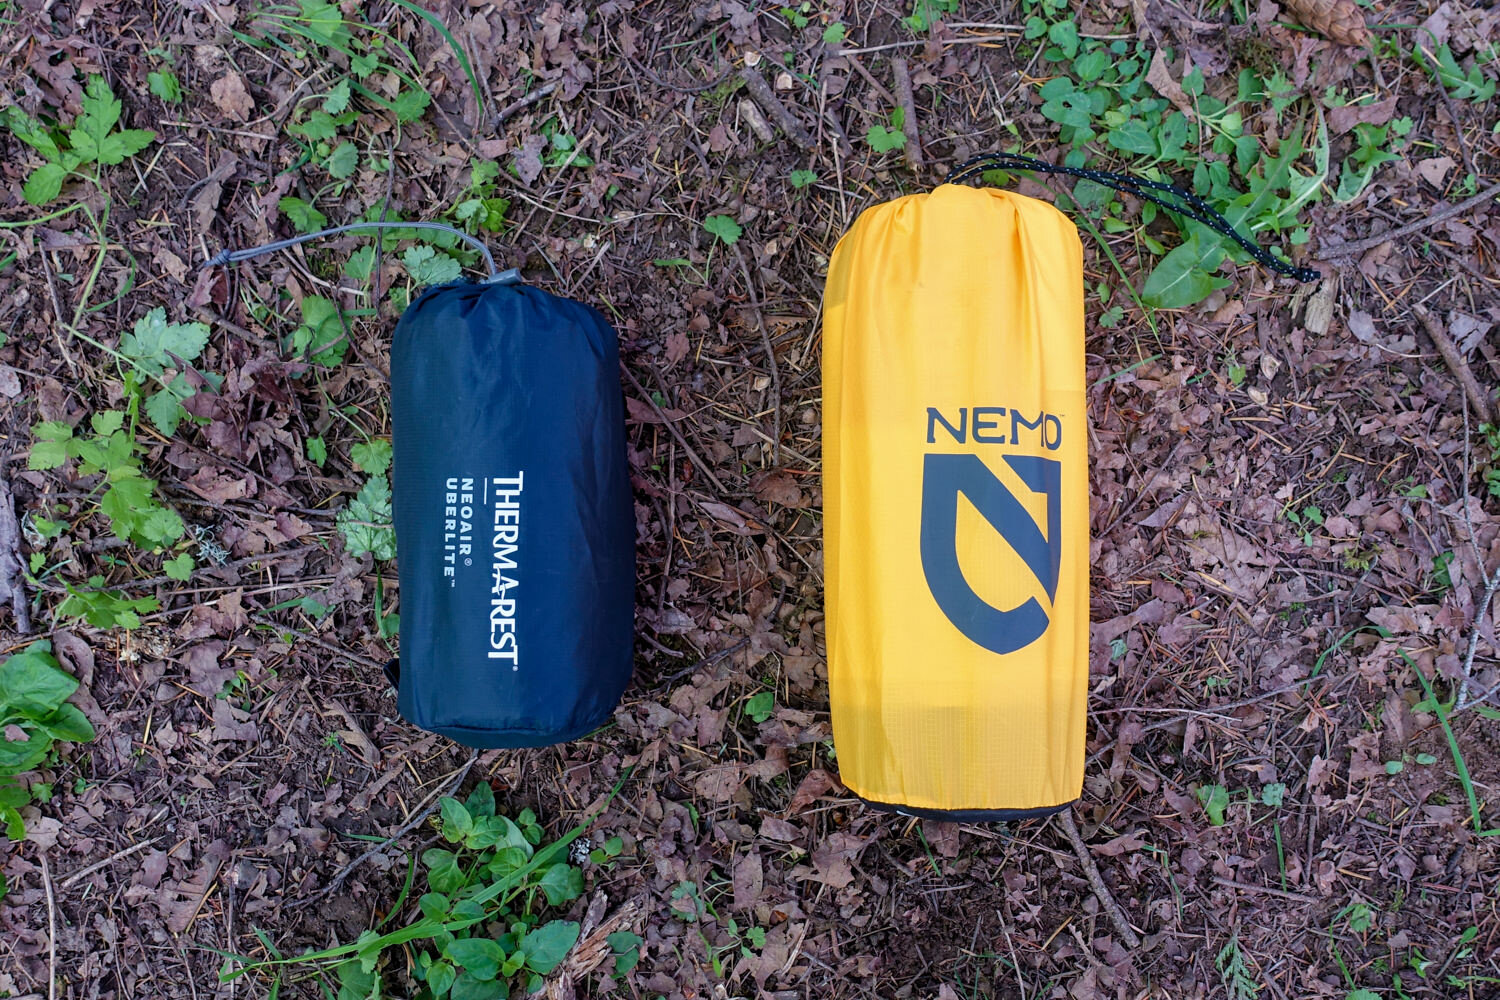 The Therm-a-Rest UberLite and NEMO Tensor are a little quieter than the XLite.